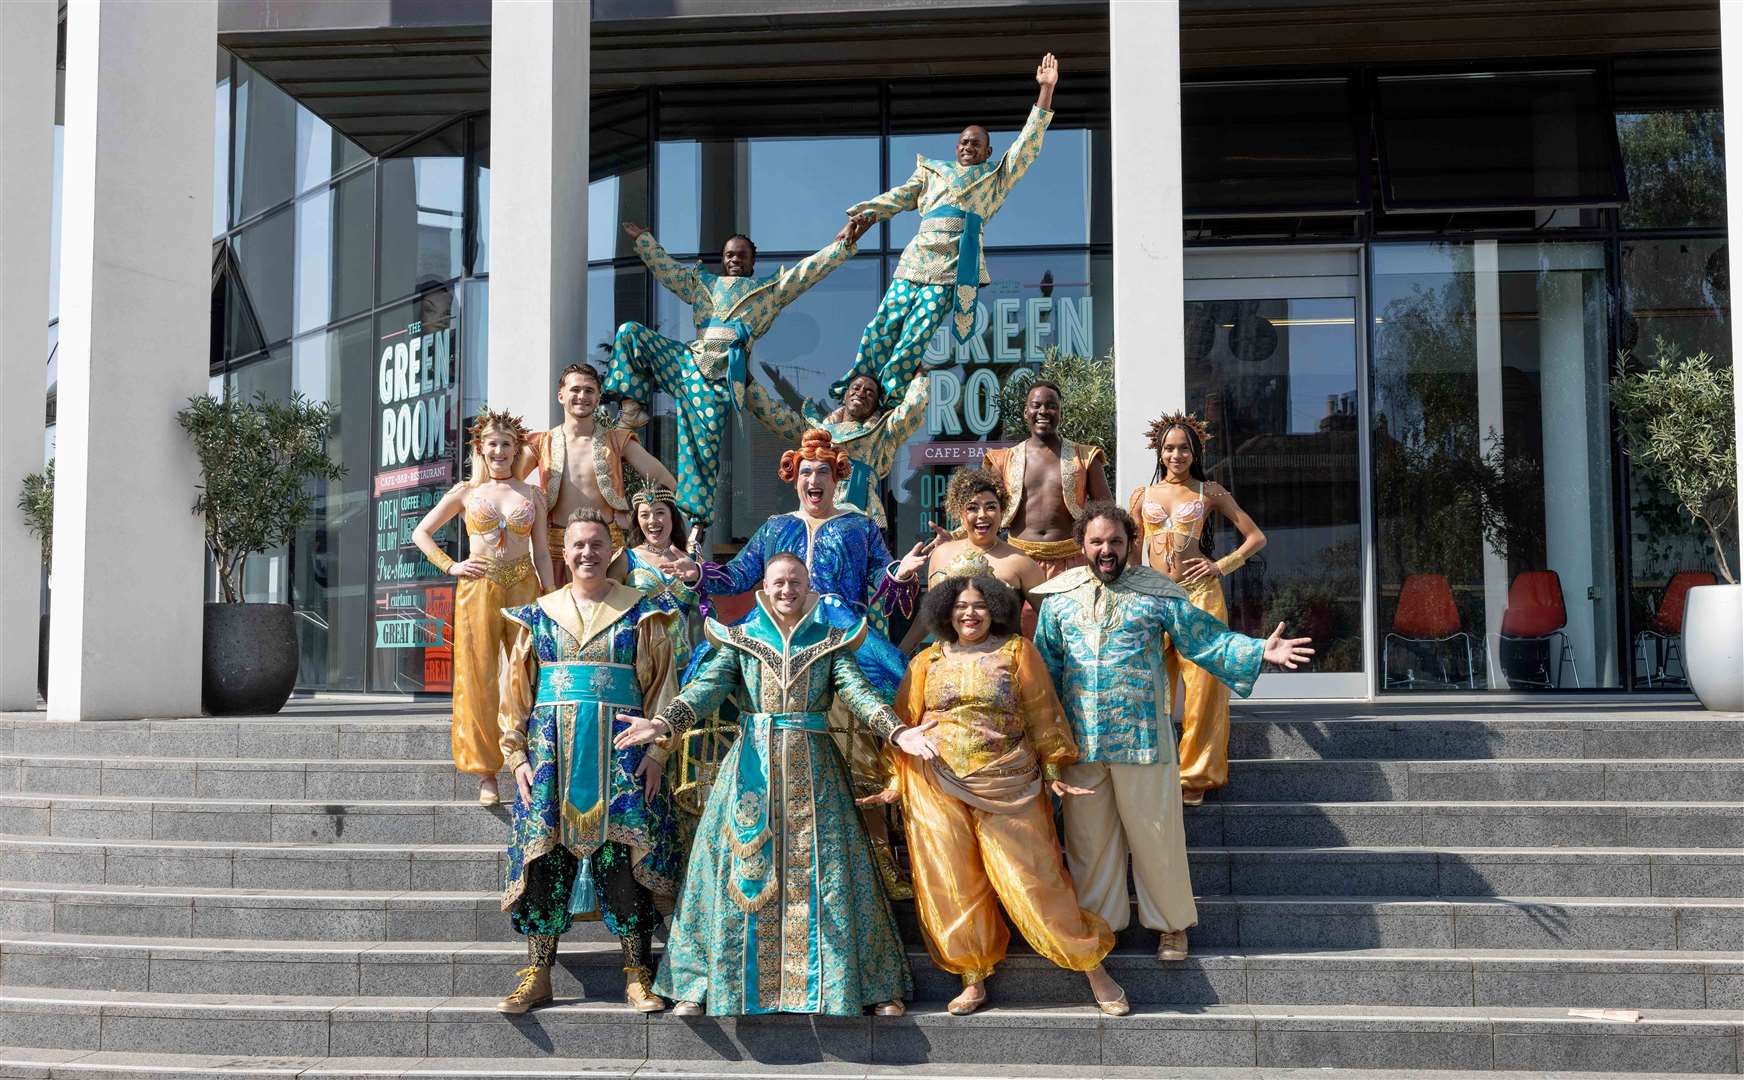 The cast of this year's Marlowe Theatre panto, Aladdin, including former Strictly star Kevin Clifton, posing outside the theatre. Picture: David Oxberry